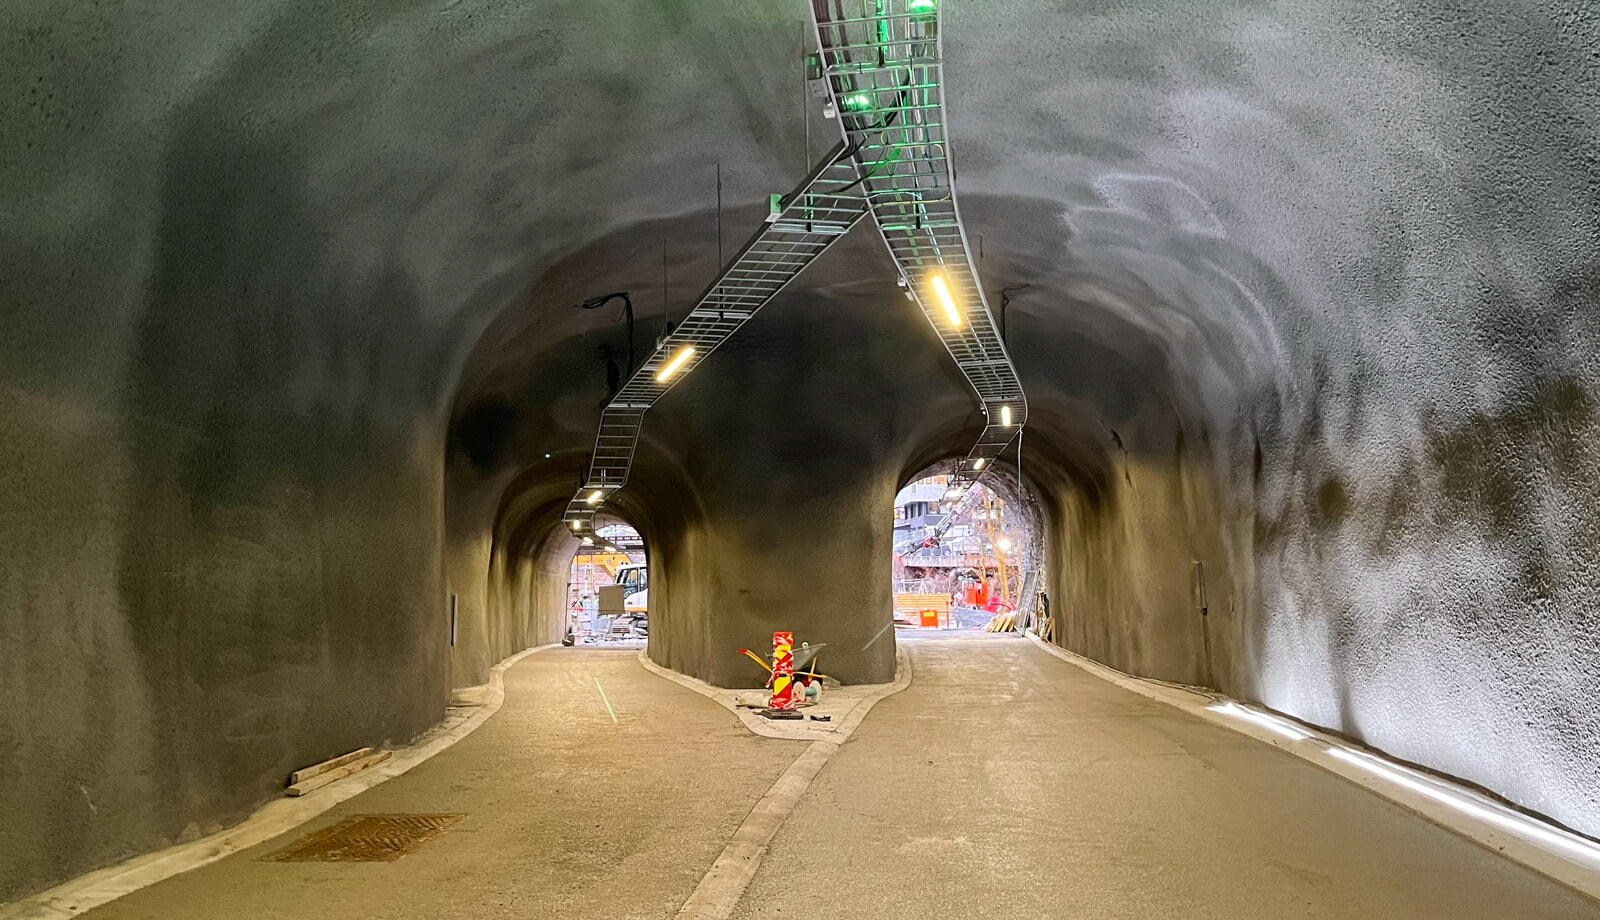 Here’s a look at the longest purpose-built cycling tunnel on the planet